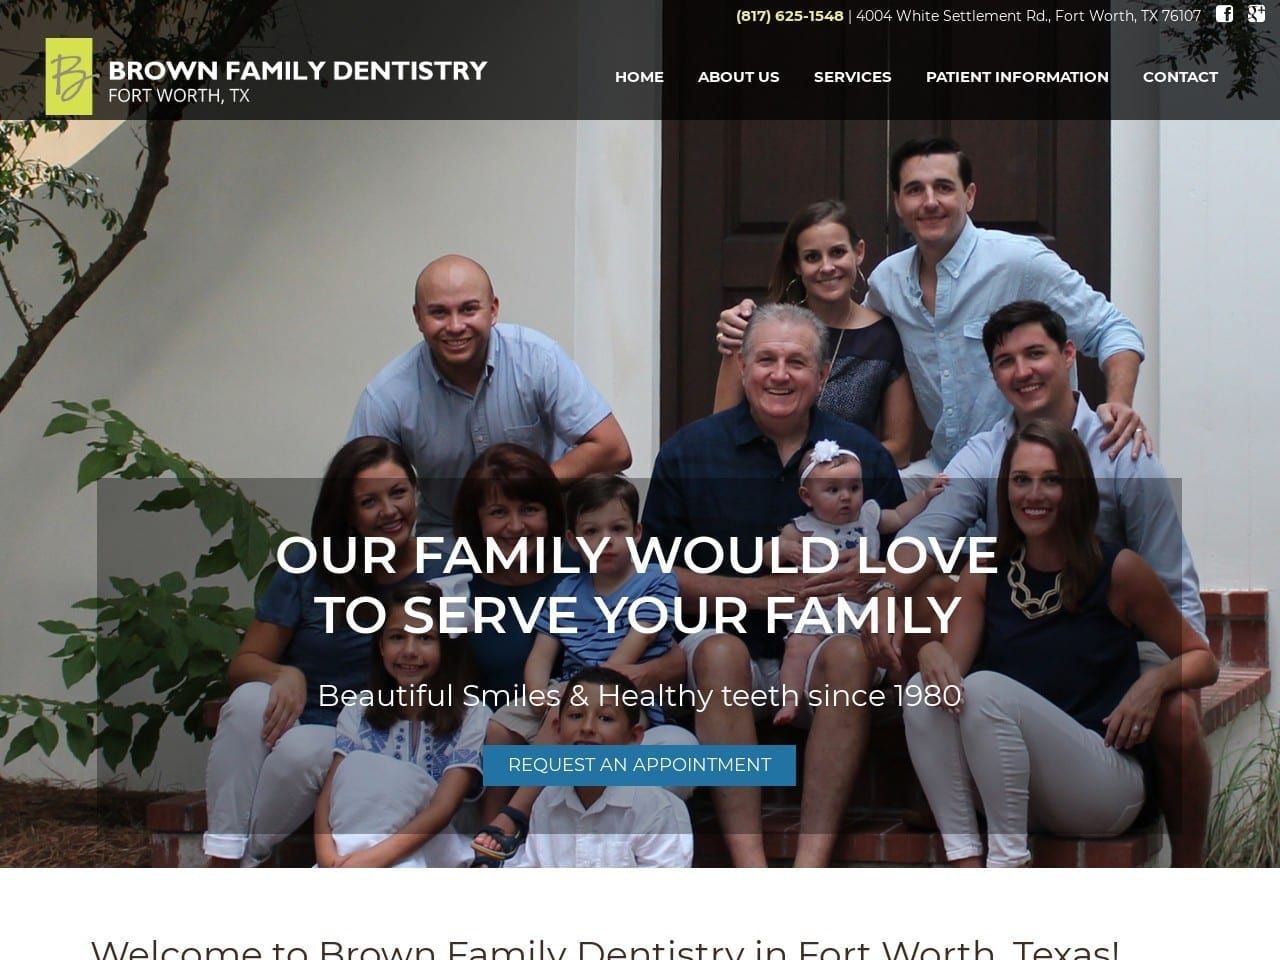 Brown Family Dentistry Website Screenshot from brownfd.com